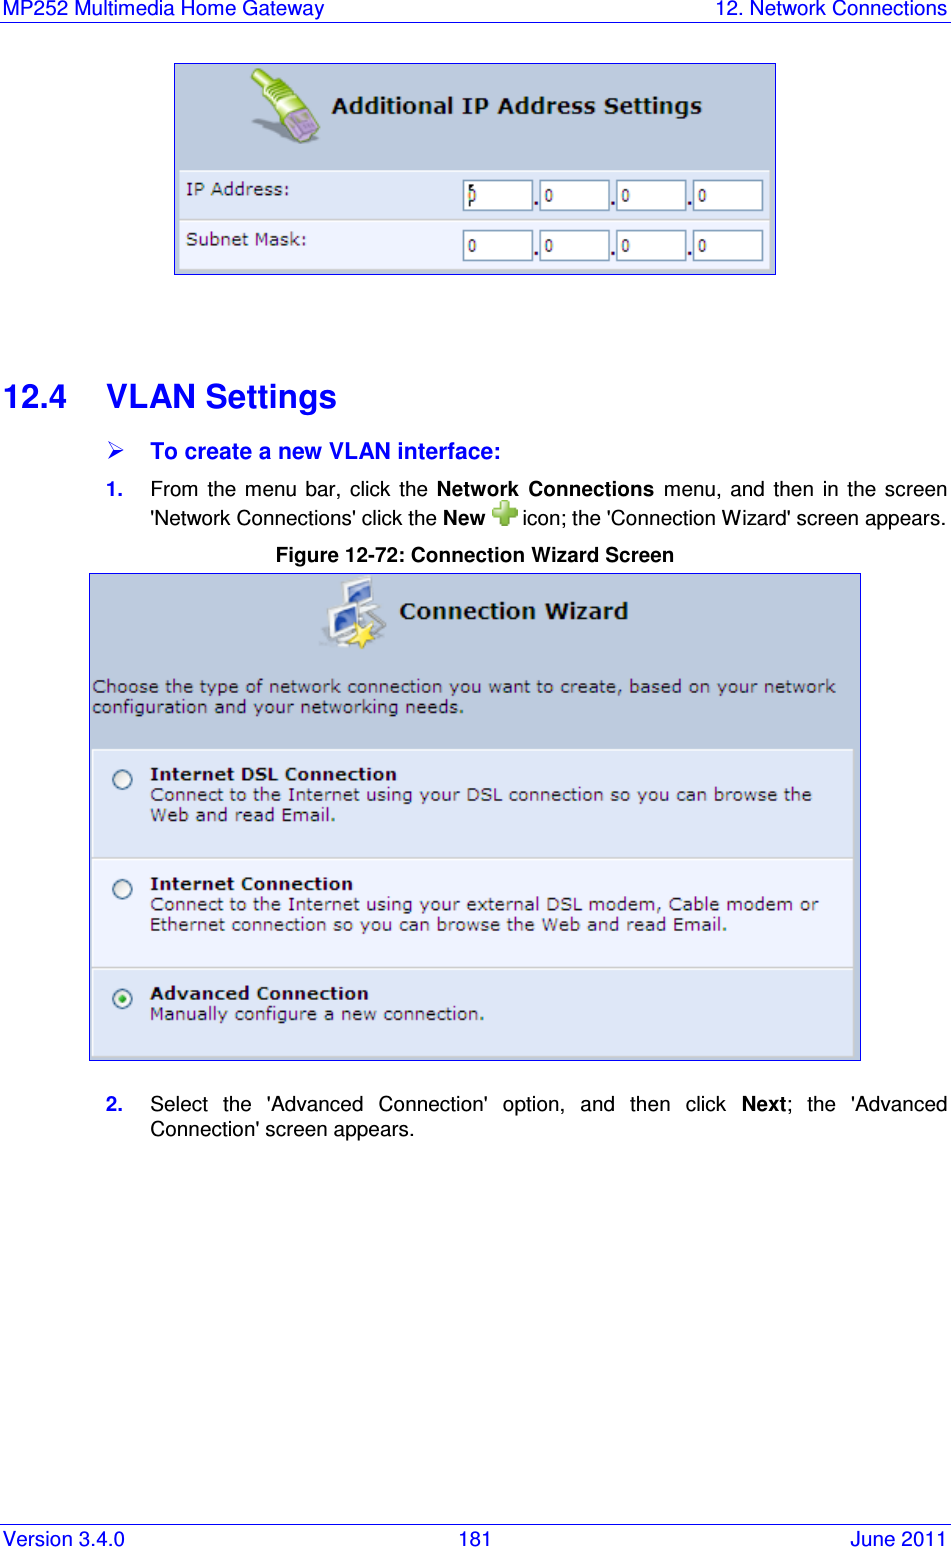 MP252 Multimedia Home Gateway  12. Network Connections Version 3.4.0  181  June 2011          12.4  VLAN Settings   To create a new VLAN interface: 1.  From  the  menu  bar,  click  the  Network  Connections  menu,  and  then  in  the  screen &apos;Network Connections&apos; click the New   icon; the &apos;Connection Wizard&apos; screen appears. Figure 12-72: Connection Wizard Screen  2.  Select  the  &apos;Advanced  Connection&apos;  option,  and  then  click  Next;  the  &apos;Advanced Connection&apos; screen appears. 